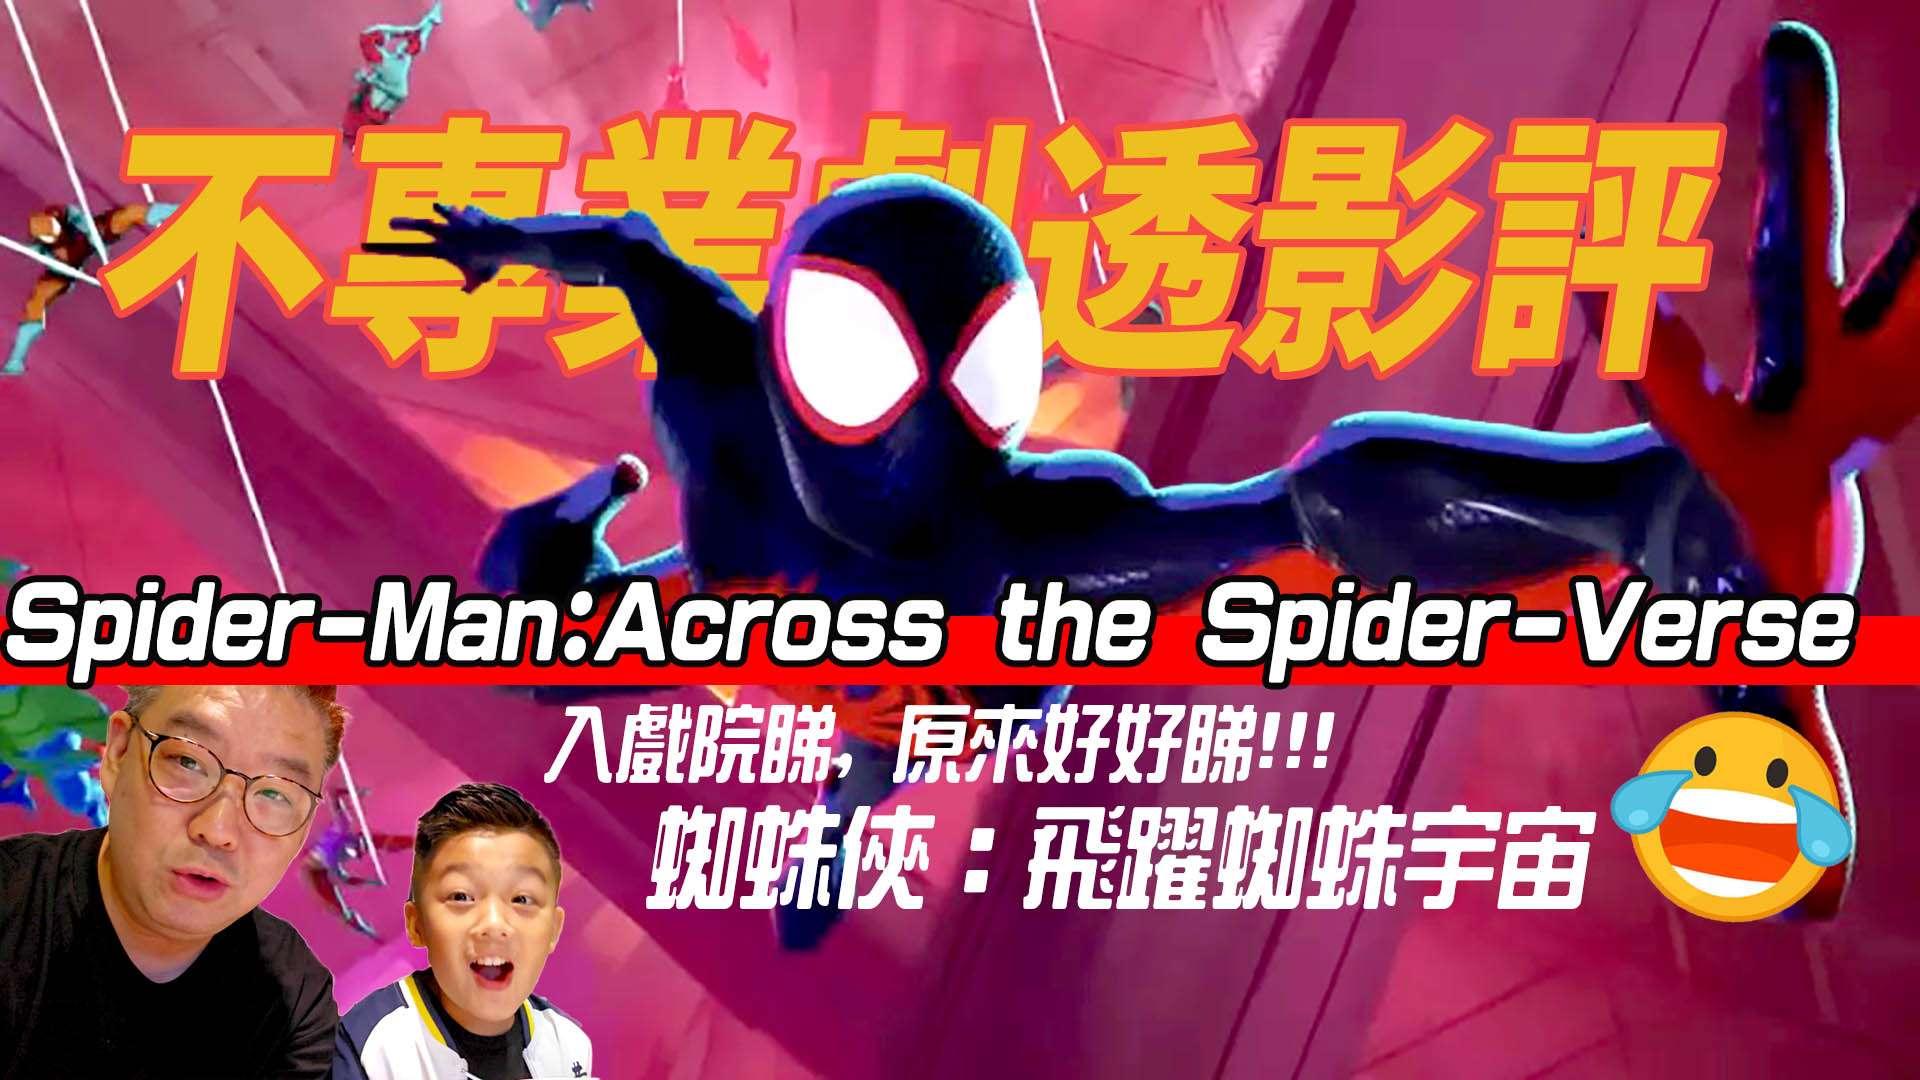 Spider-Man Across the Spider-Verse review forum copy.jpg